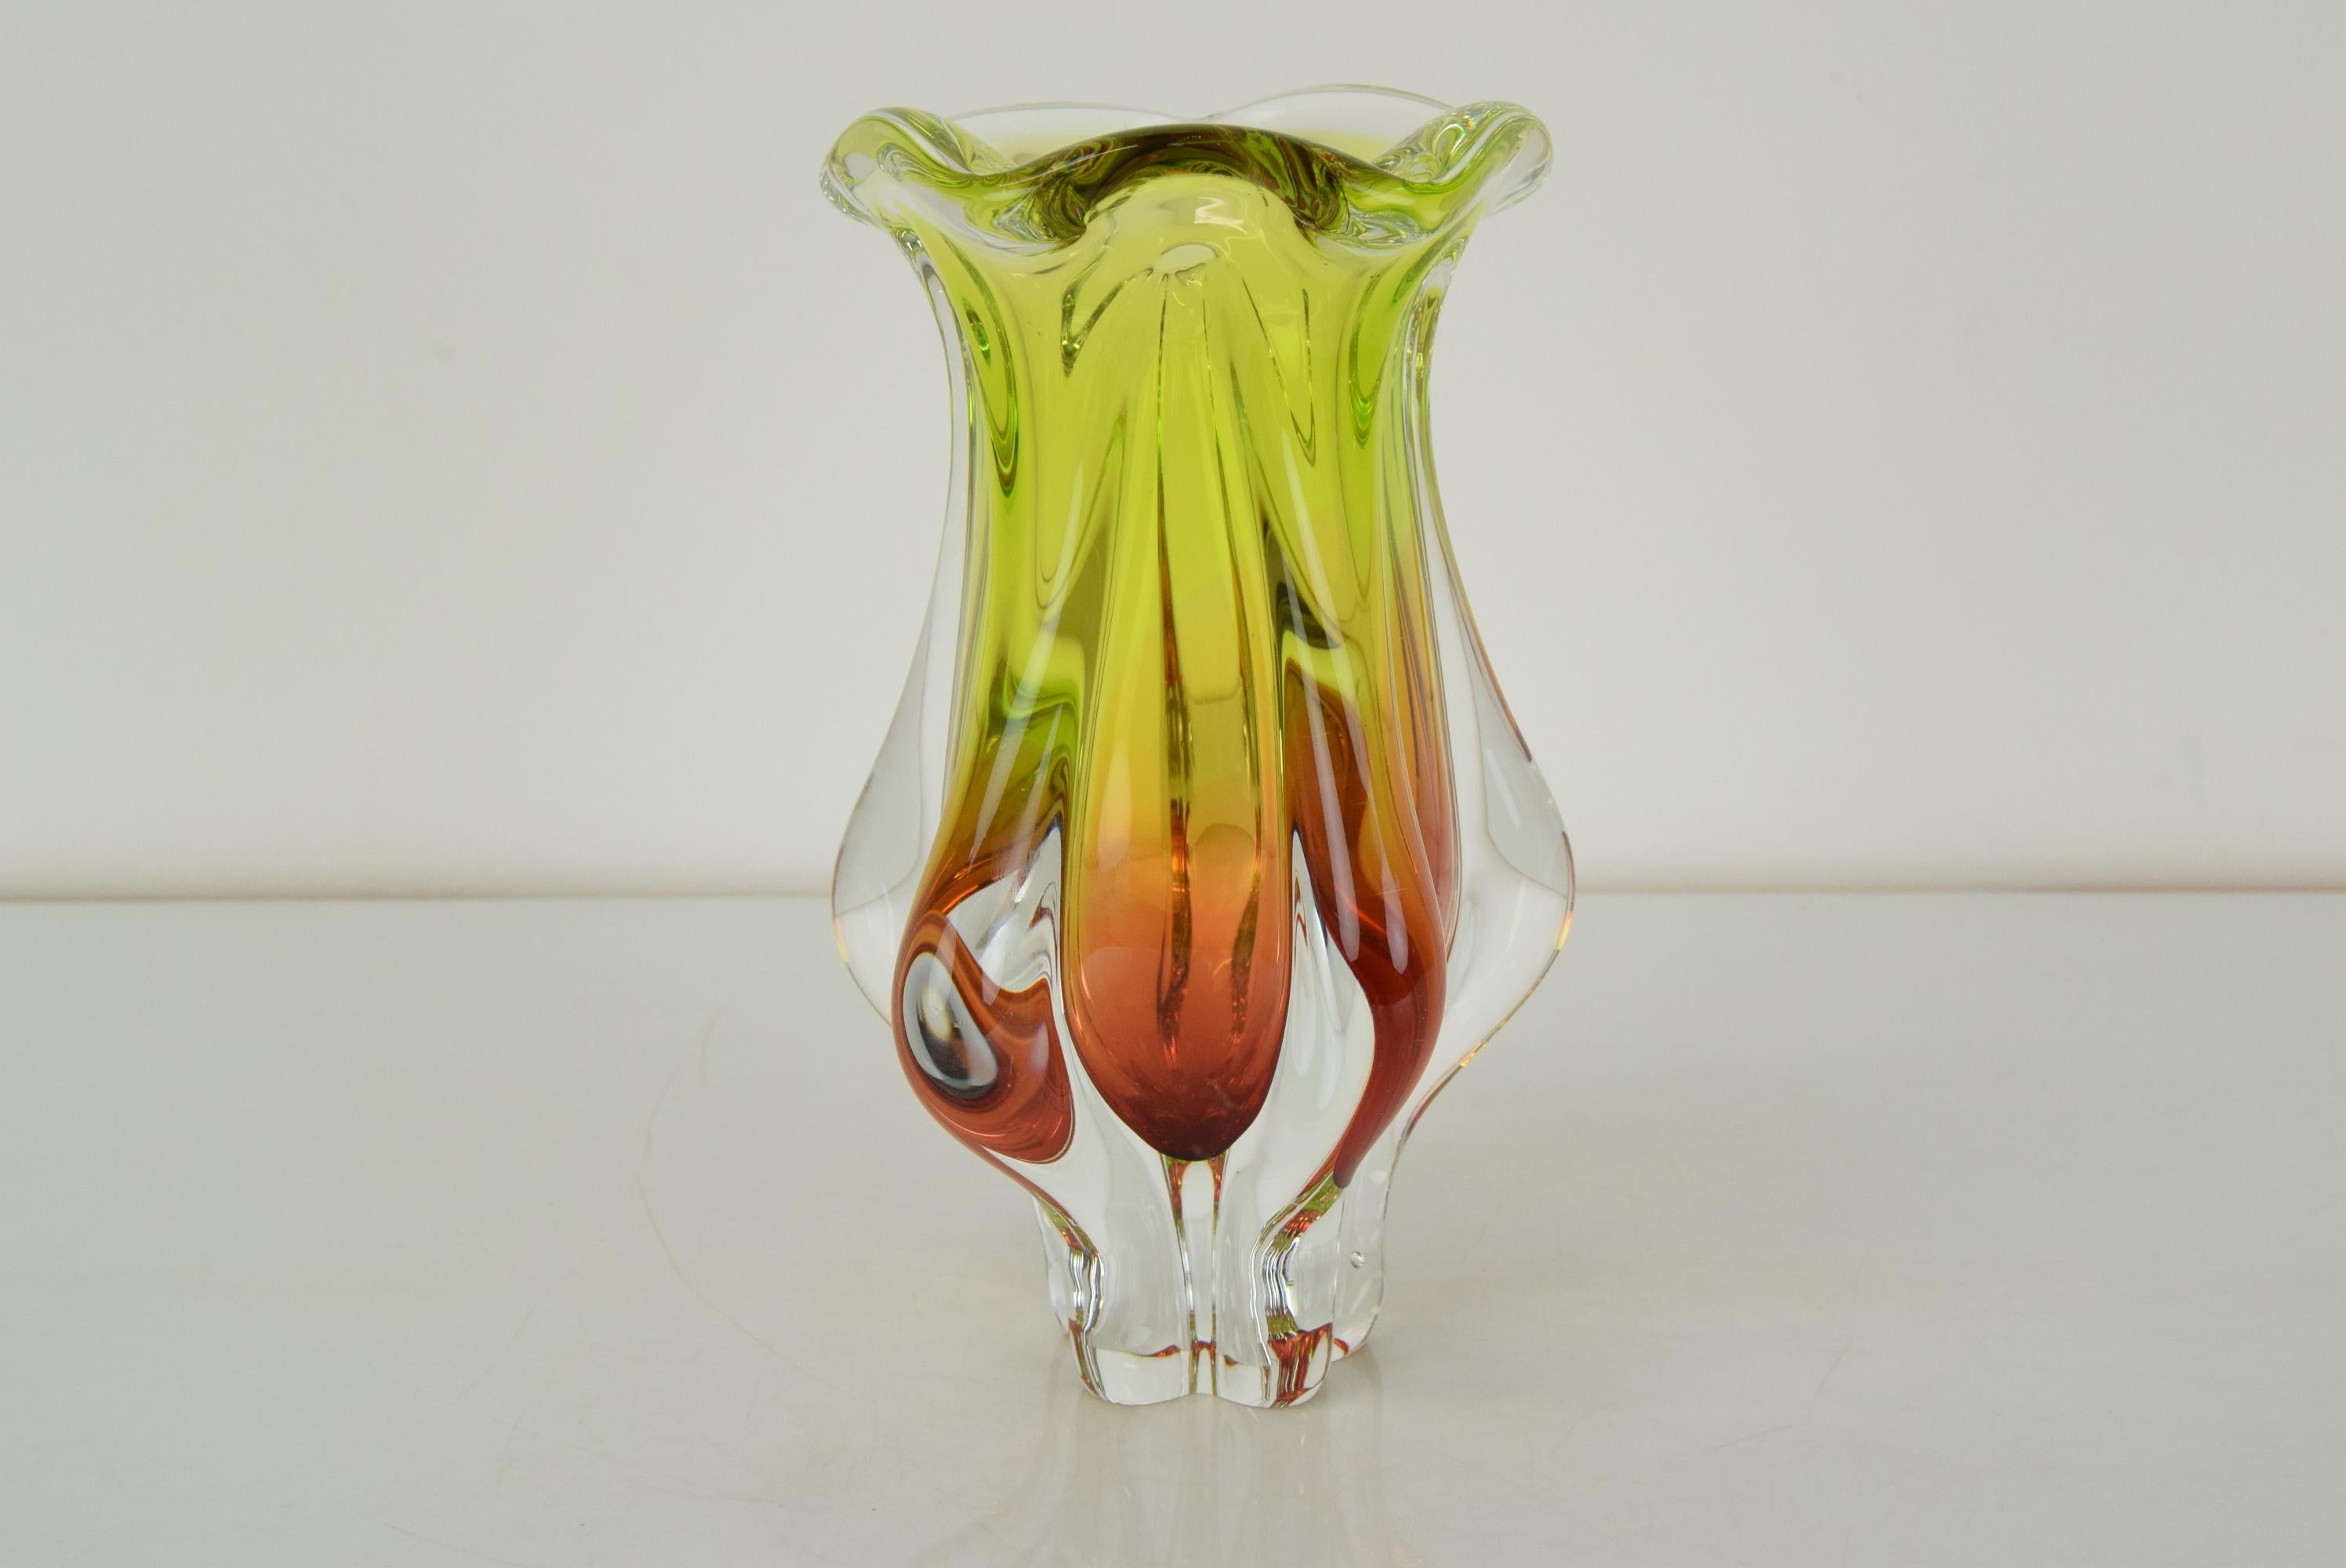 Made in Czechoslovakia
Made of Art glass
Re-polished
Good Original condition.